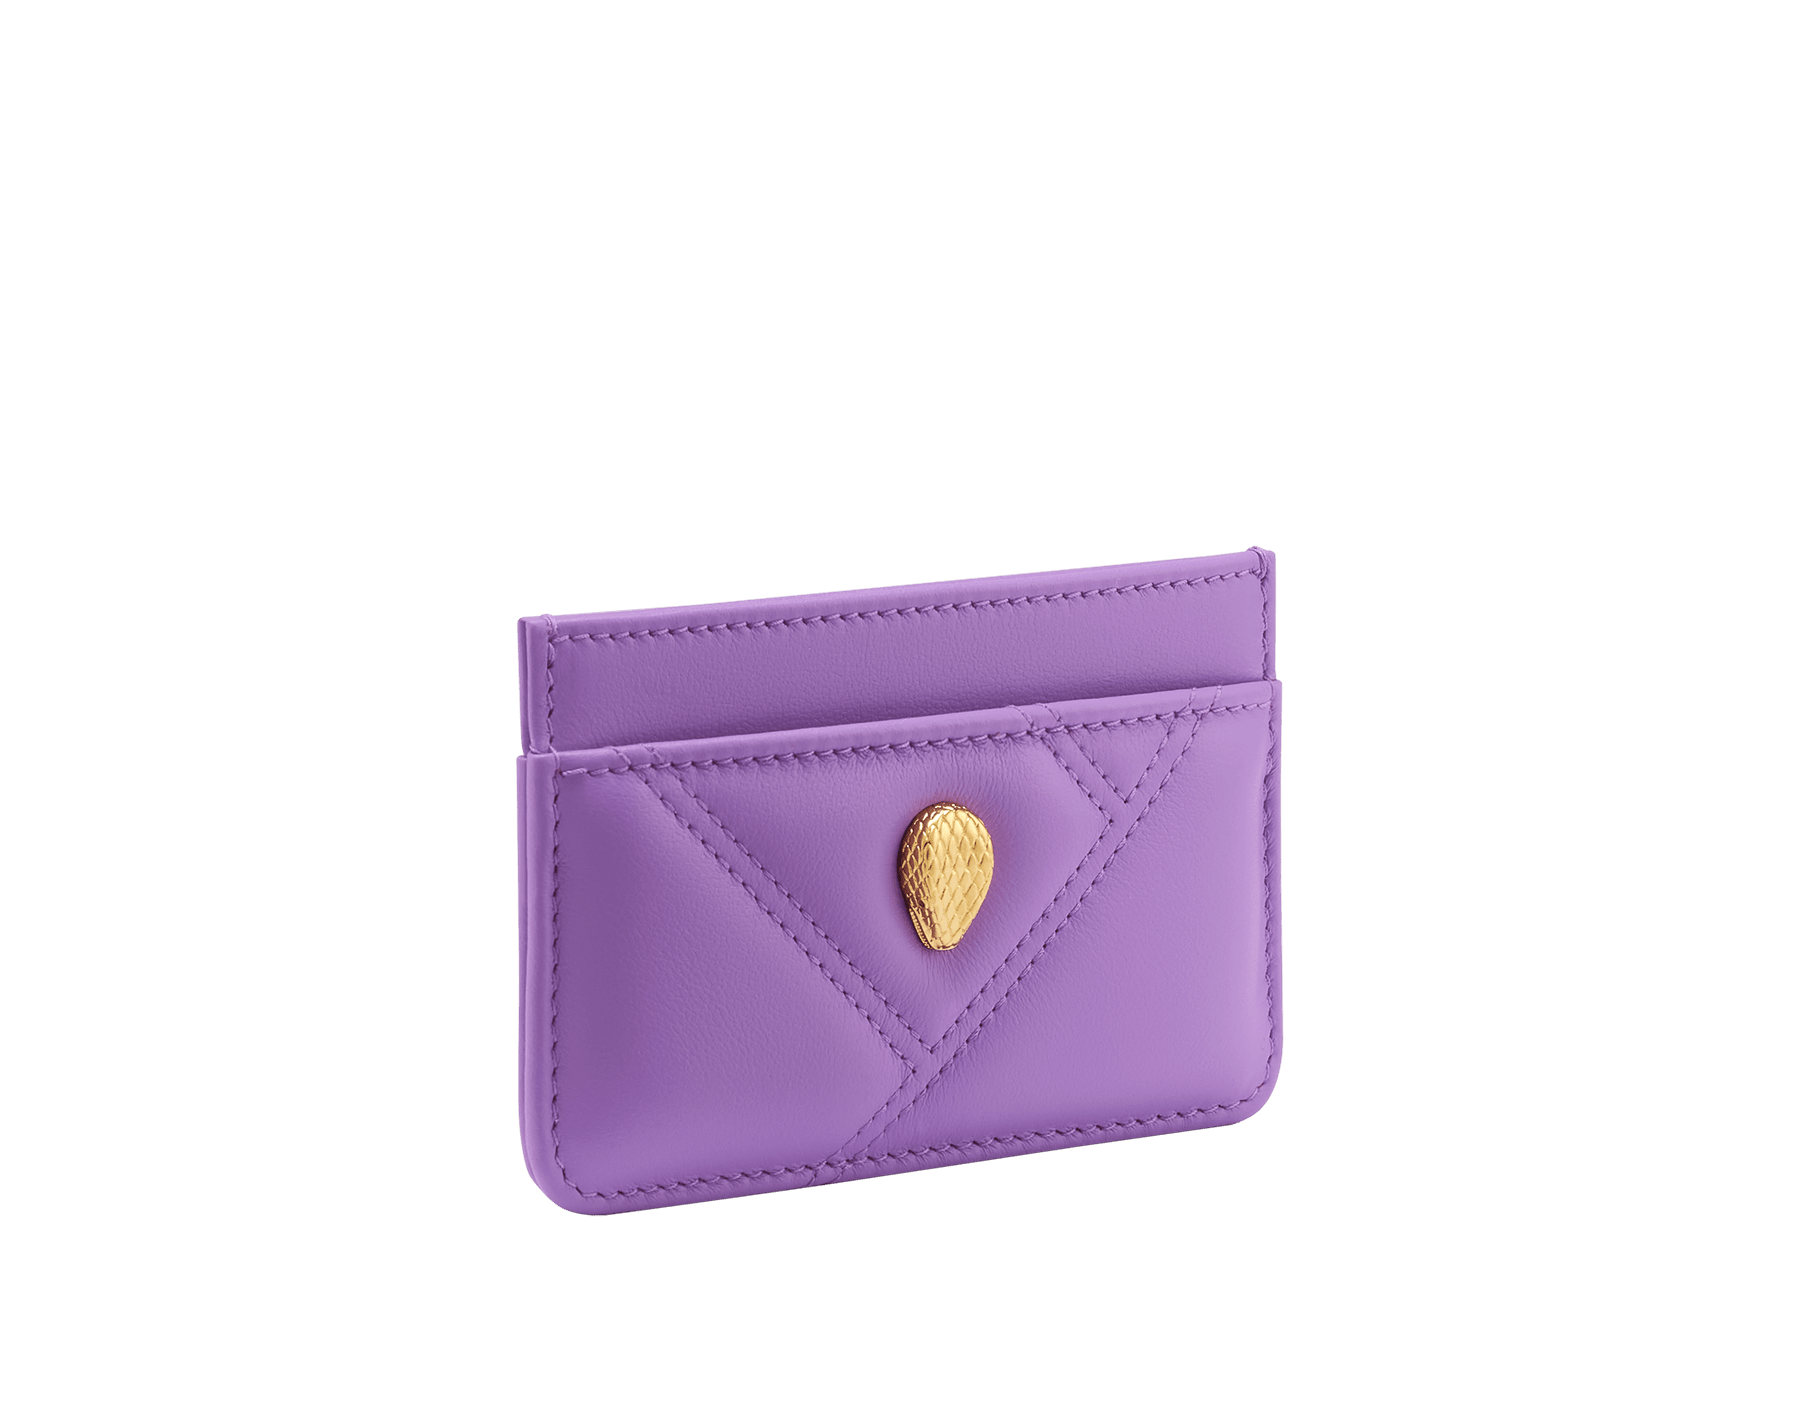 Serpenti Cabochon card holder in sheer amethyst lilac calf leather with a maxi quilted pattern and watercolor opal light blue nappa leather lining. Captivating snakehead rivet in gold-plated brass embellished with red enamel eyes. SCB-CCHOLDERa image 1